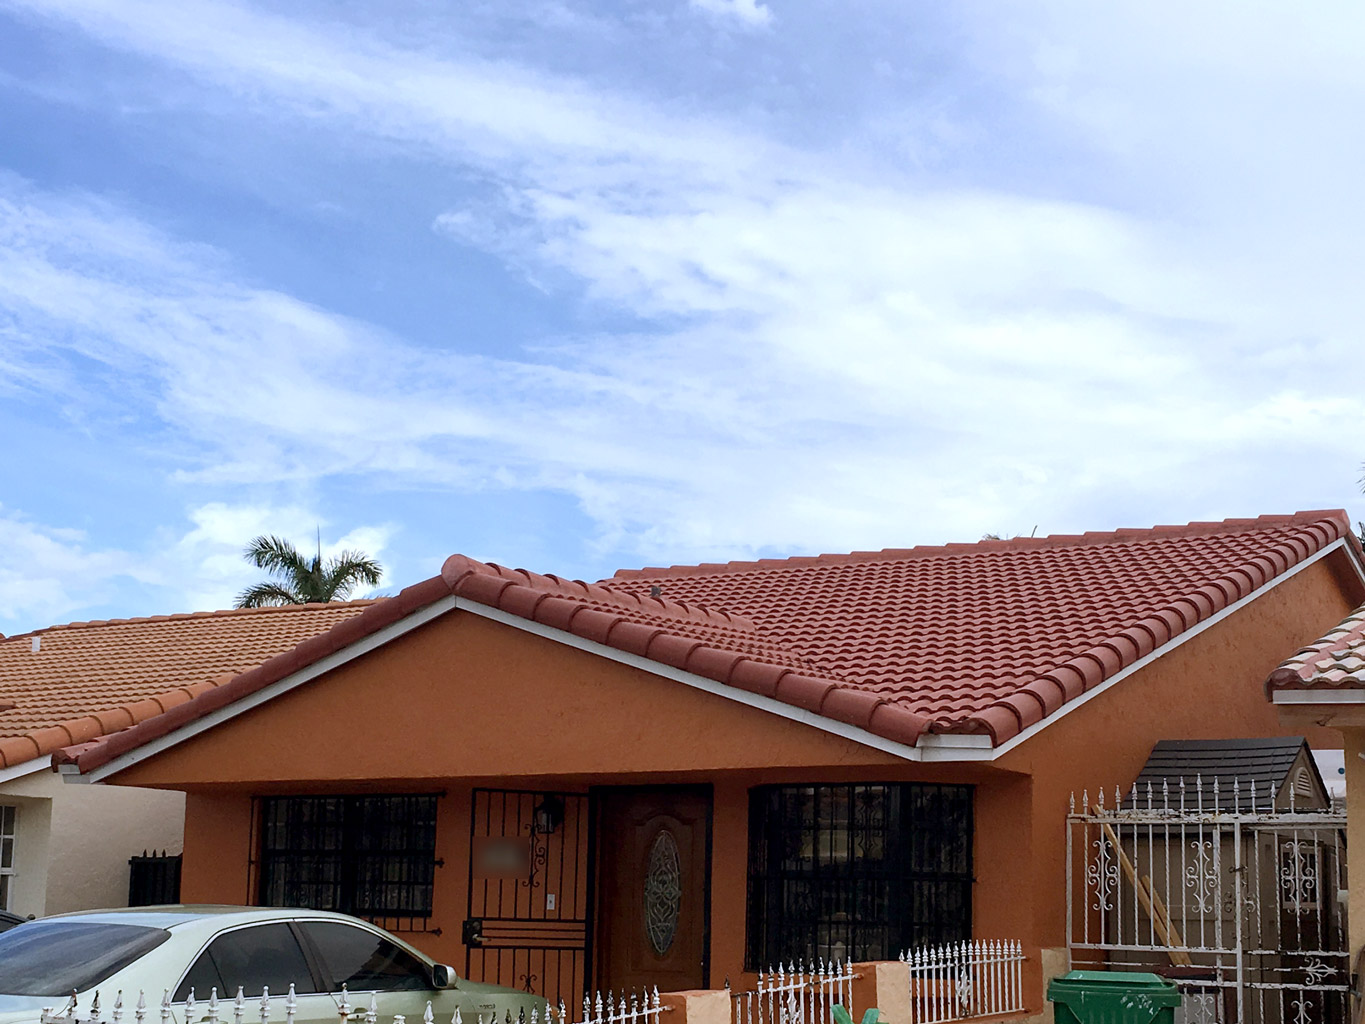 Completed concrete tile roof